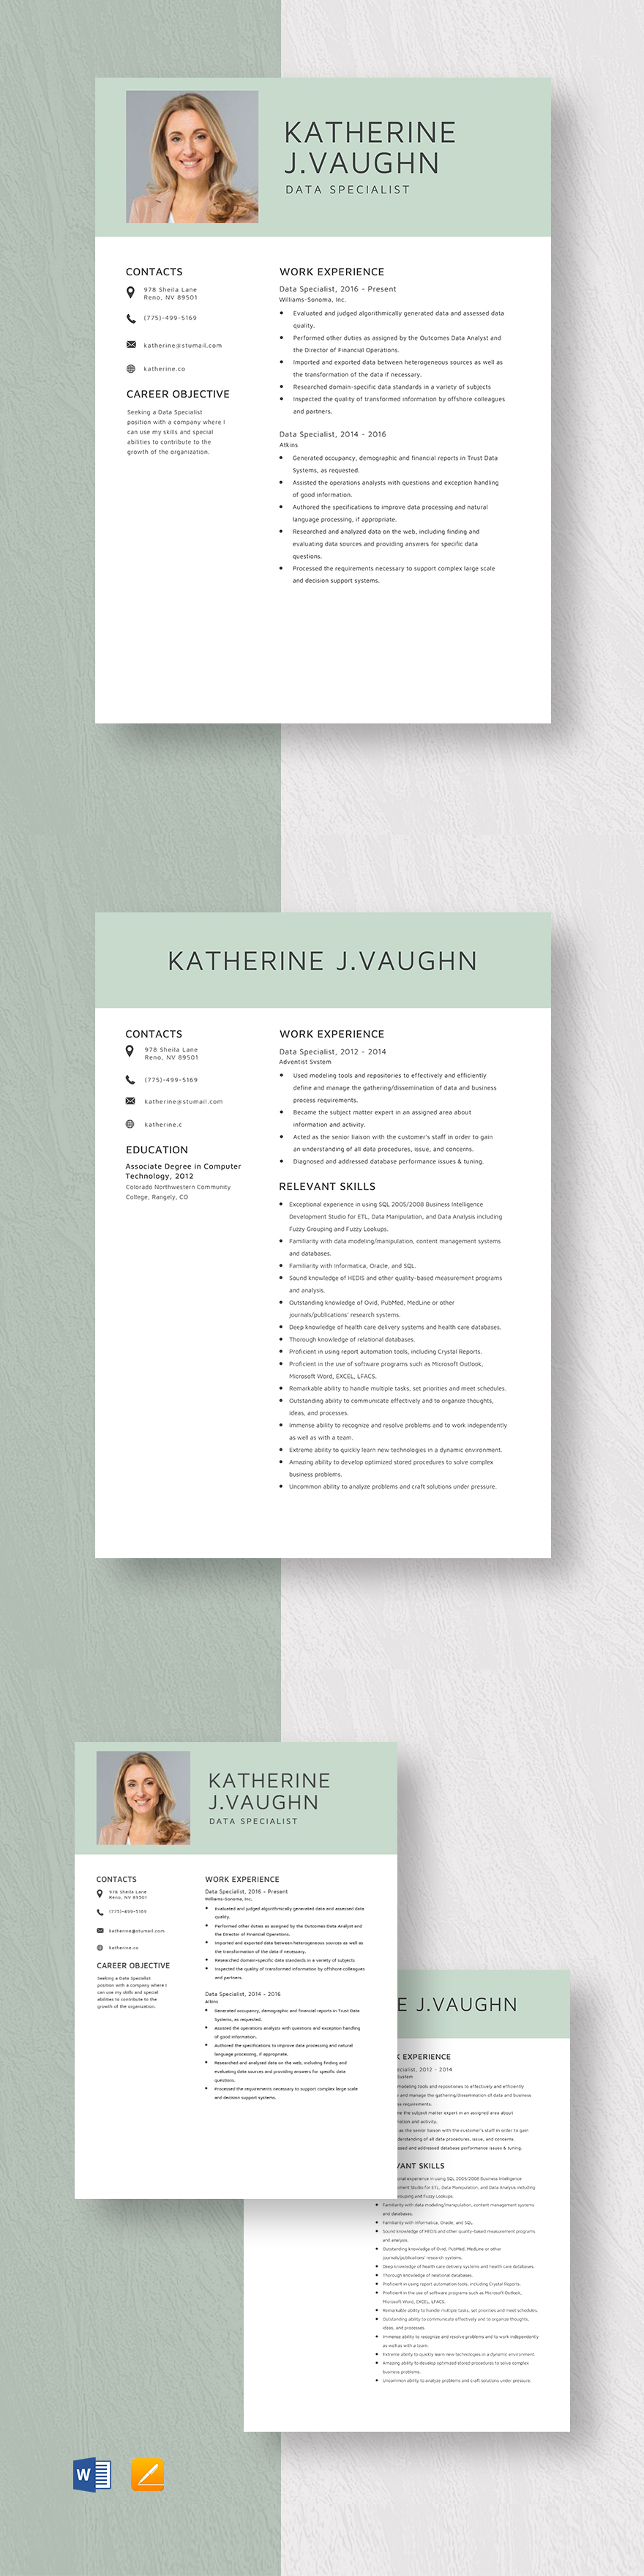 Data Specialist Resume Template Template